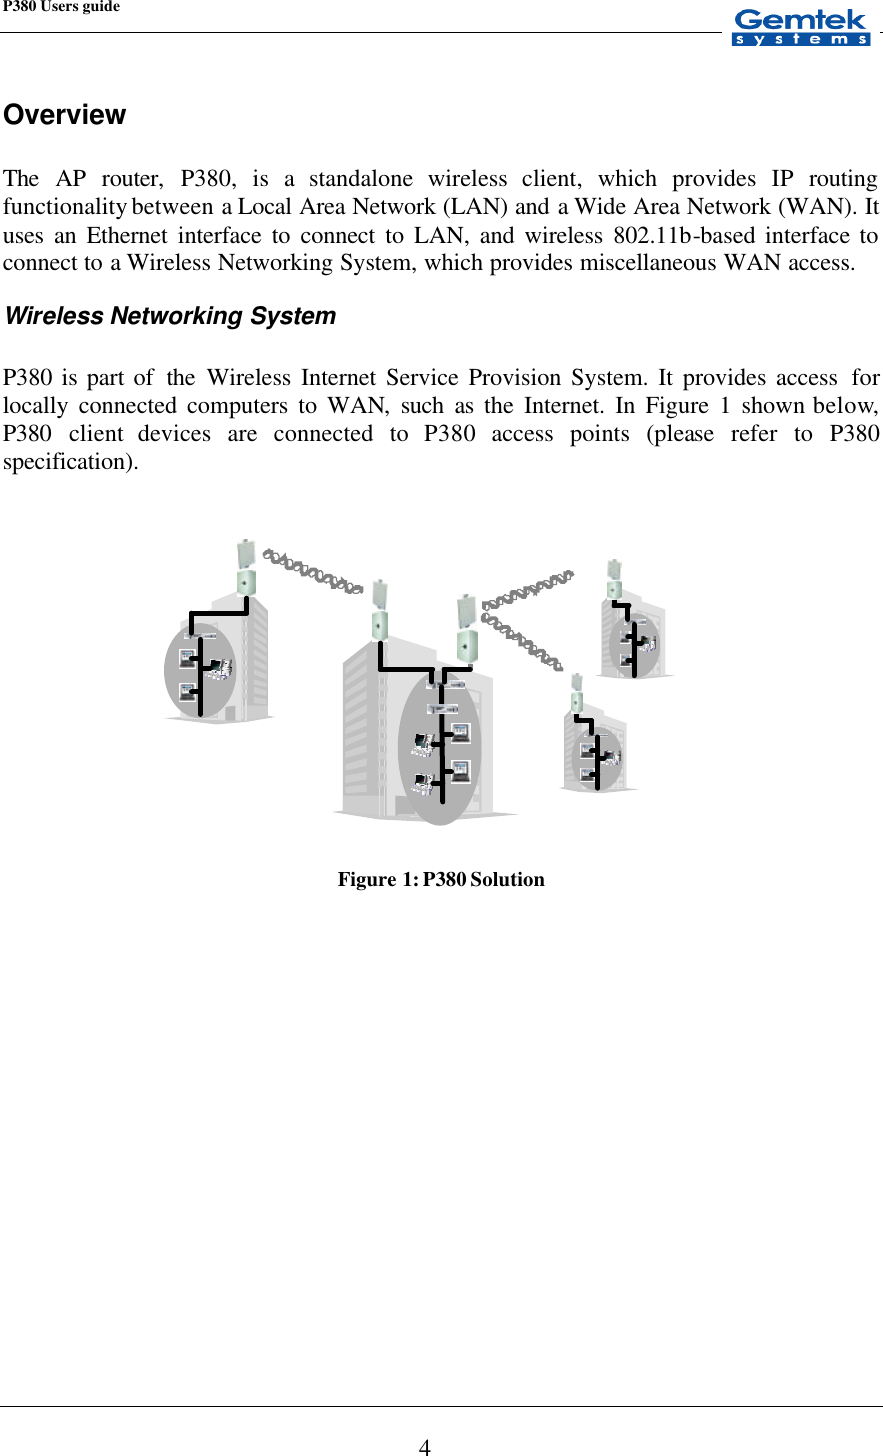 P380 Users guide            4 Overview  The  AP router, P380, is a  standalone wireless client, which provides IP routing functionality between a  Local Area Network (LAN) and a  Wide Area Network (WAN). It uses  an  Ethernet interface to connect to LAN, and wireless 802.11b-based interface to connect to a Wireless Networking System, which provides miscellaneous WAN access.  Wireless Networking System  P380 is part of  the  Wireless Internet Service Provision System. It provides access  for locally connected computers to WAN, such as the  Internet.  In Figure 1 shown below, P380 client devices are connected to P380 access points (please refer to P380 specification).    Figure 1: P380 Solution 